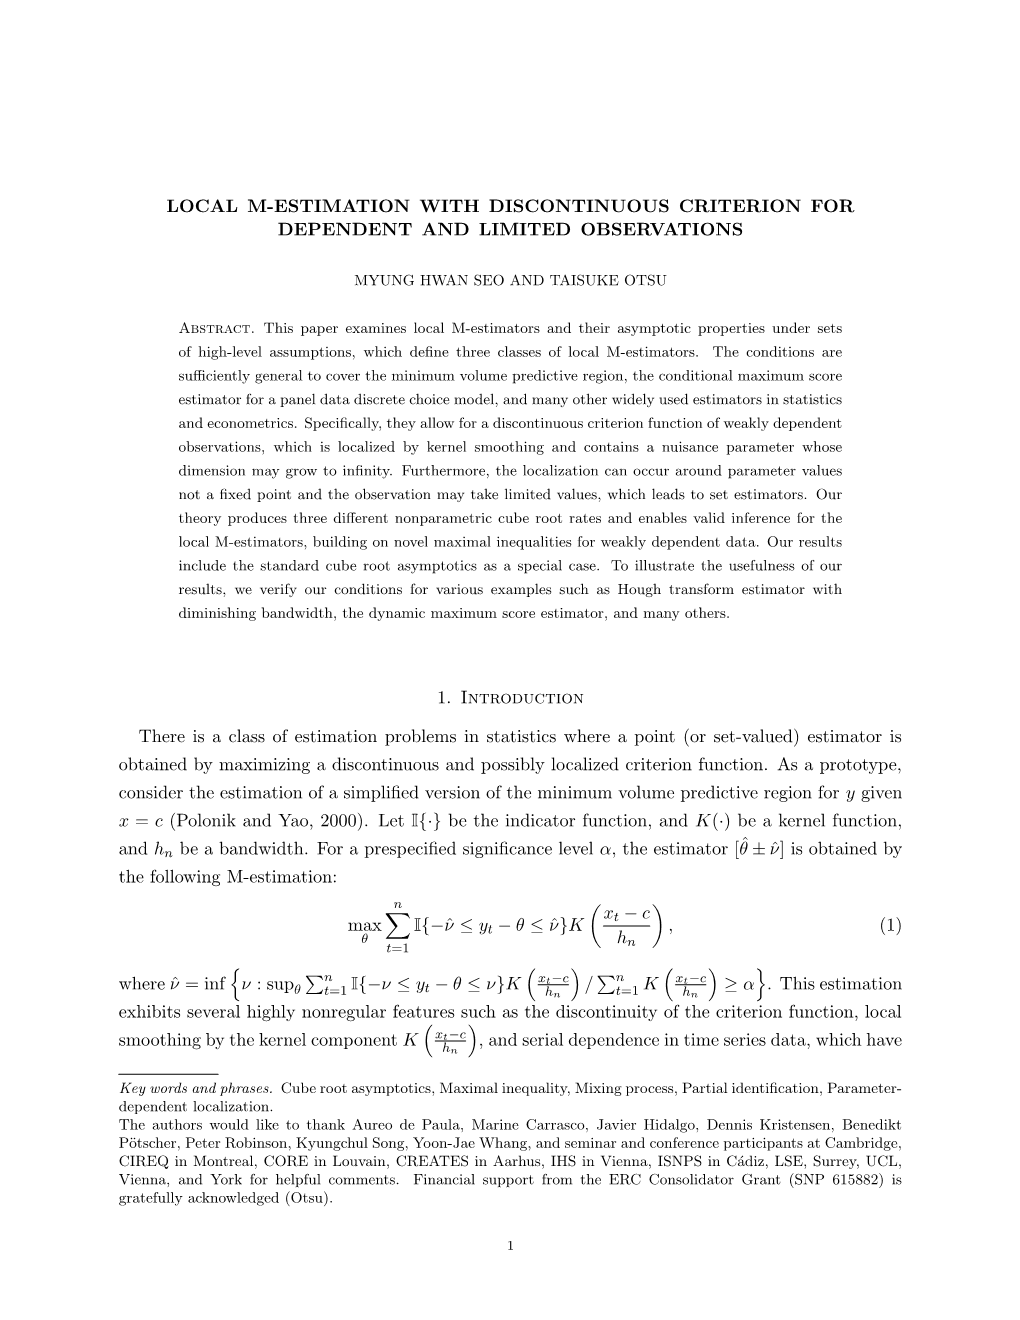 Local M-Estimation with Discontinuous Criterion for Dependent and Limited Observations